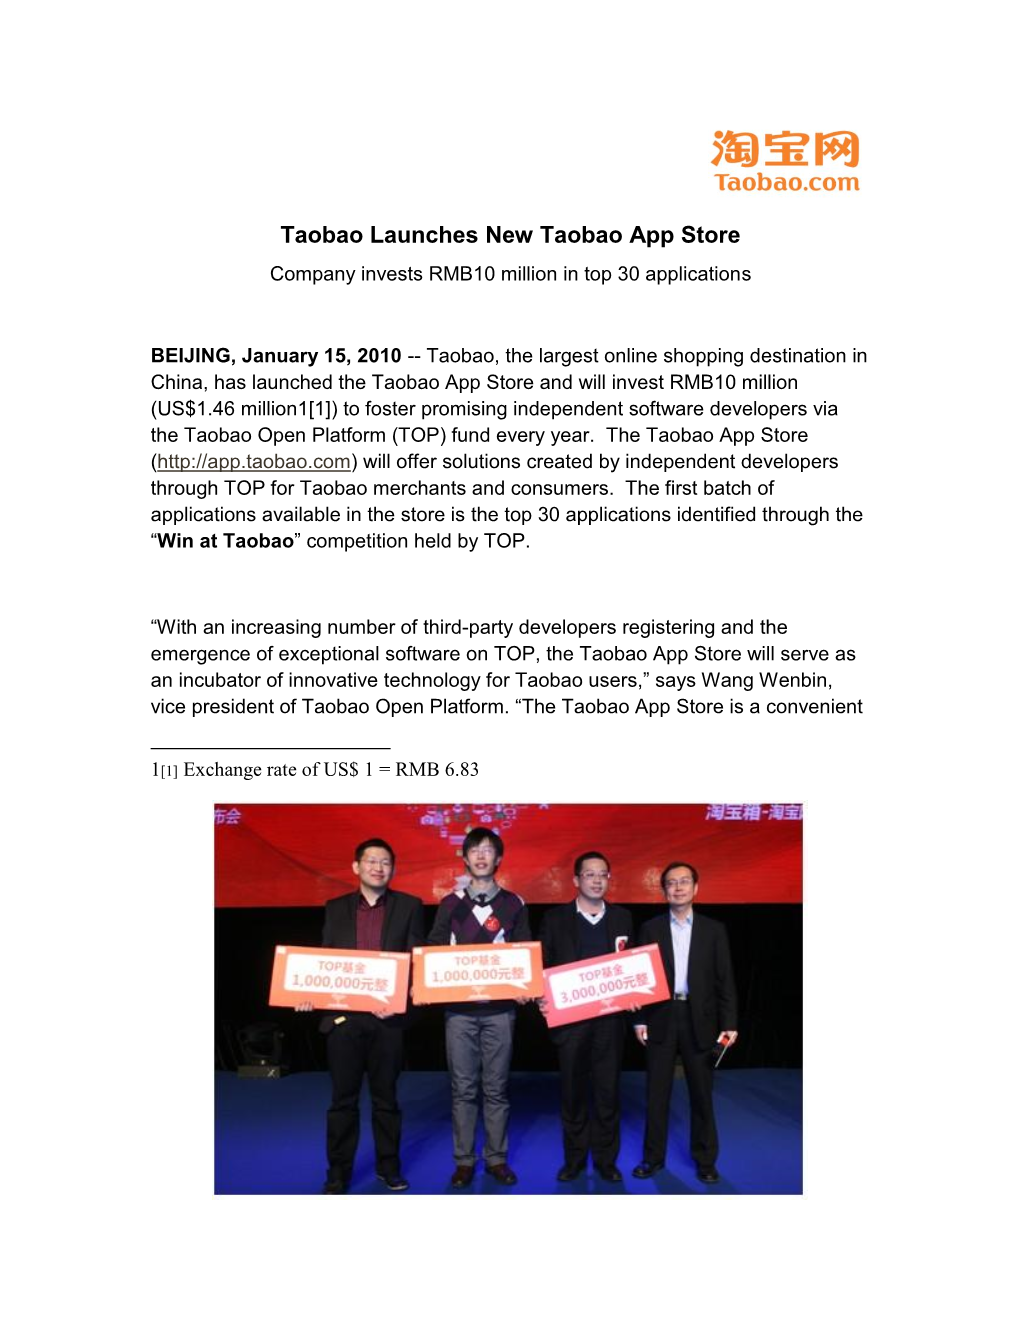 Taobao Launches New Taobao App Store Company Invests RMB10 Million in Top 30 Applications